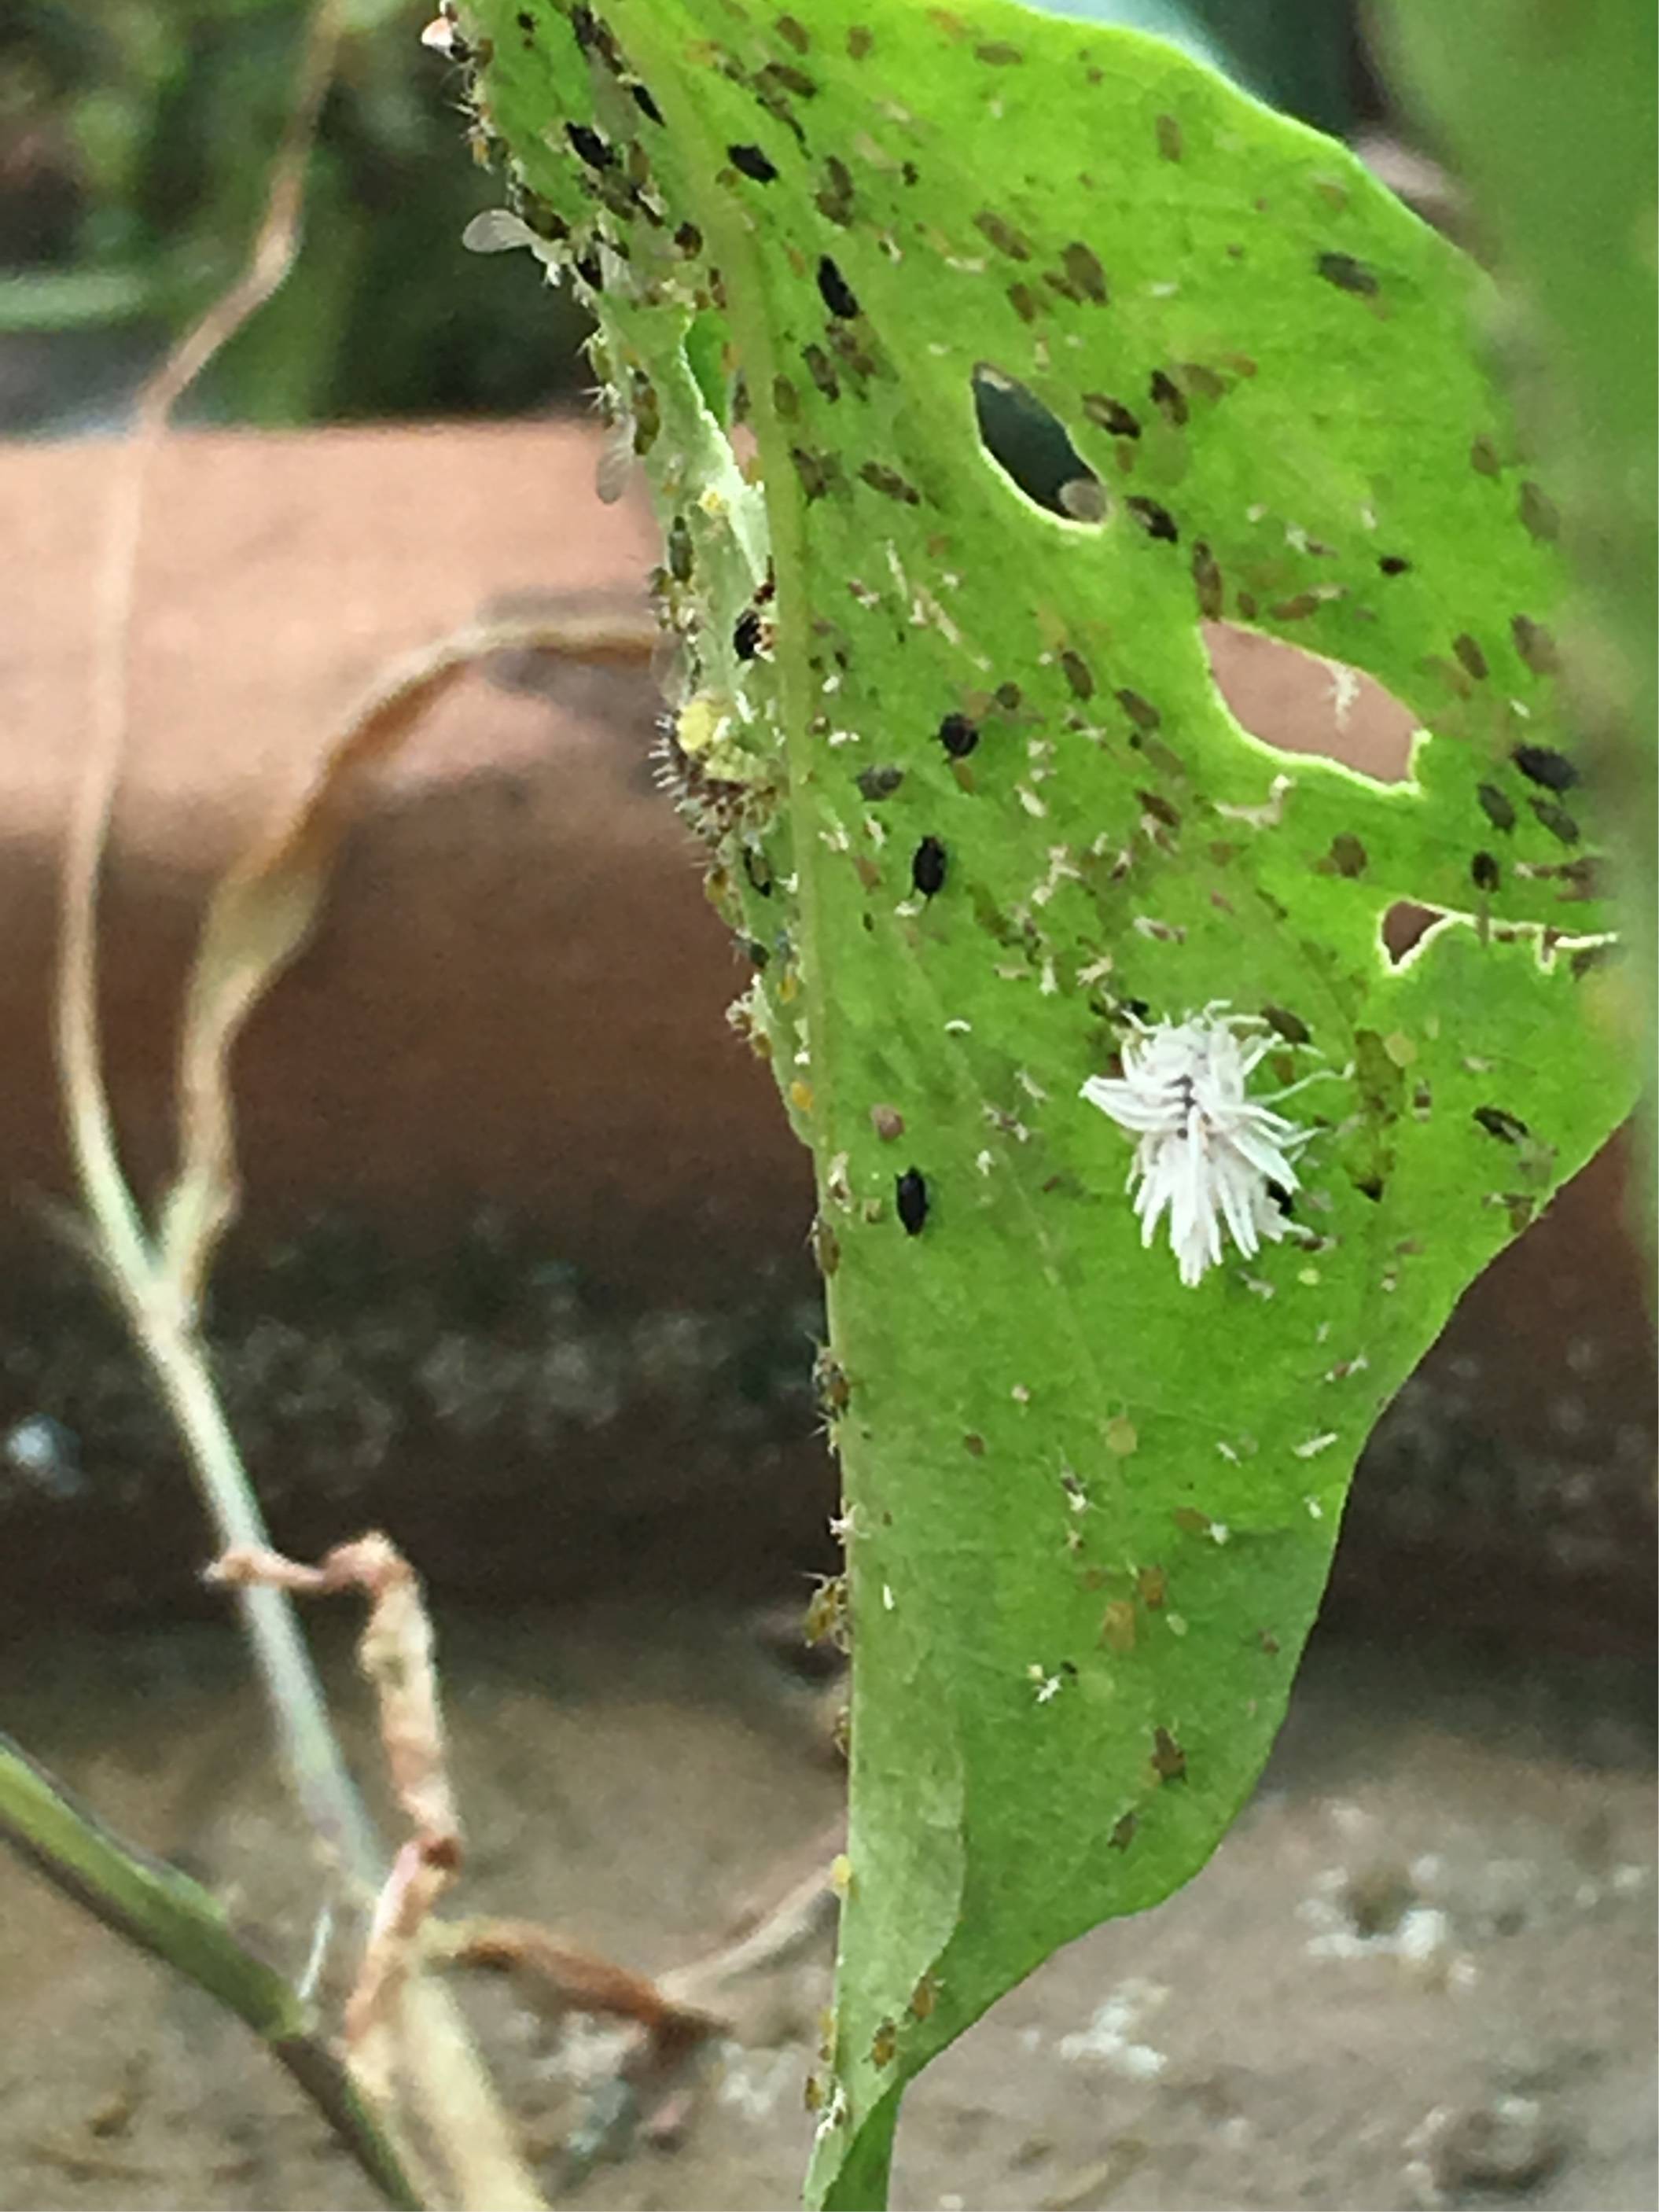 White insect attack on pepper plant - Gardening & Landscaping Stack ...